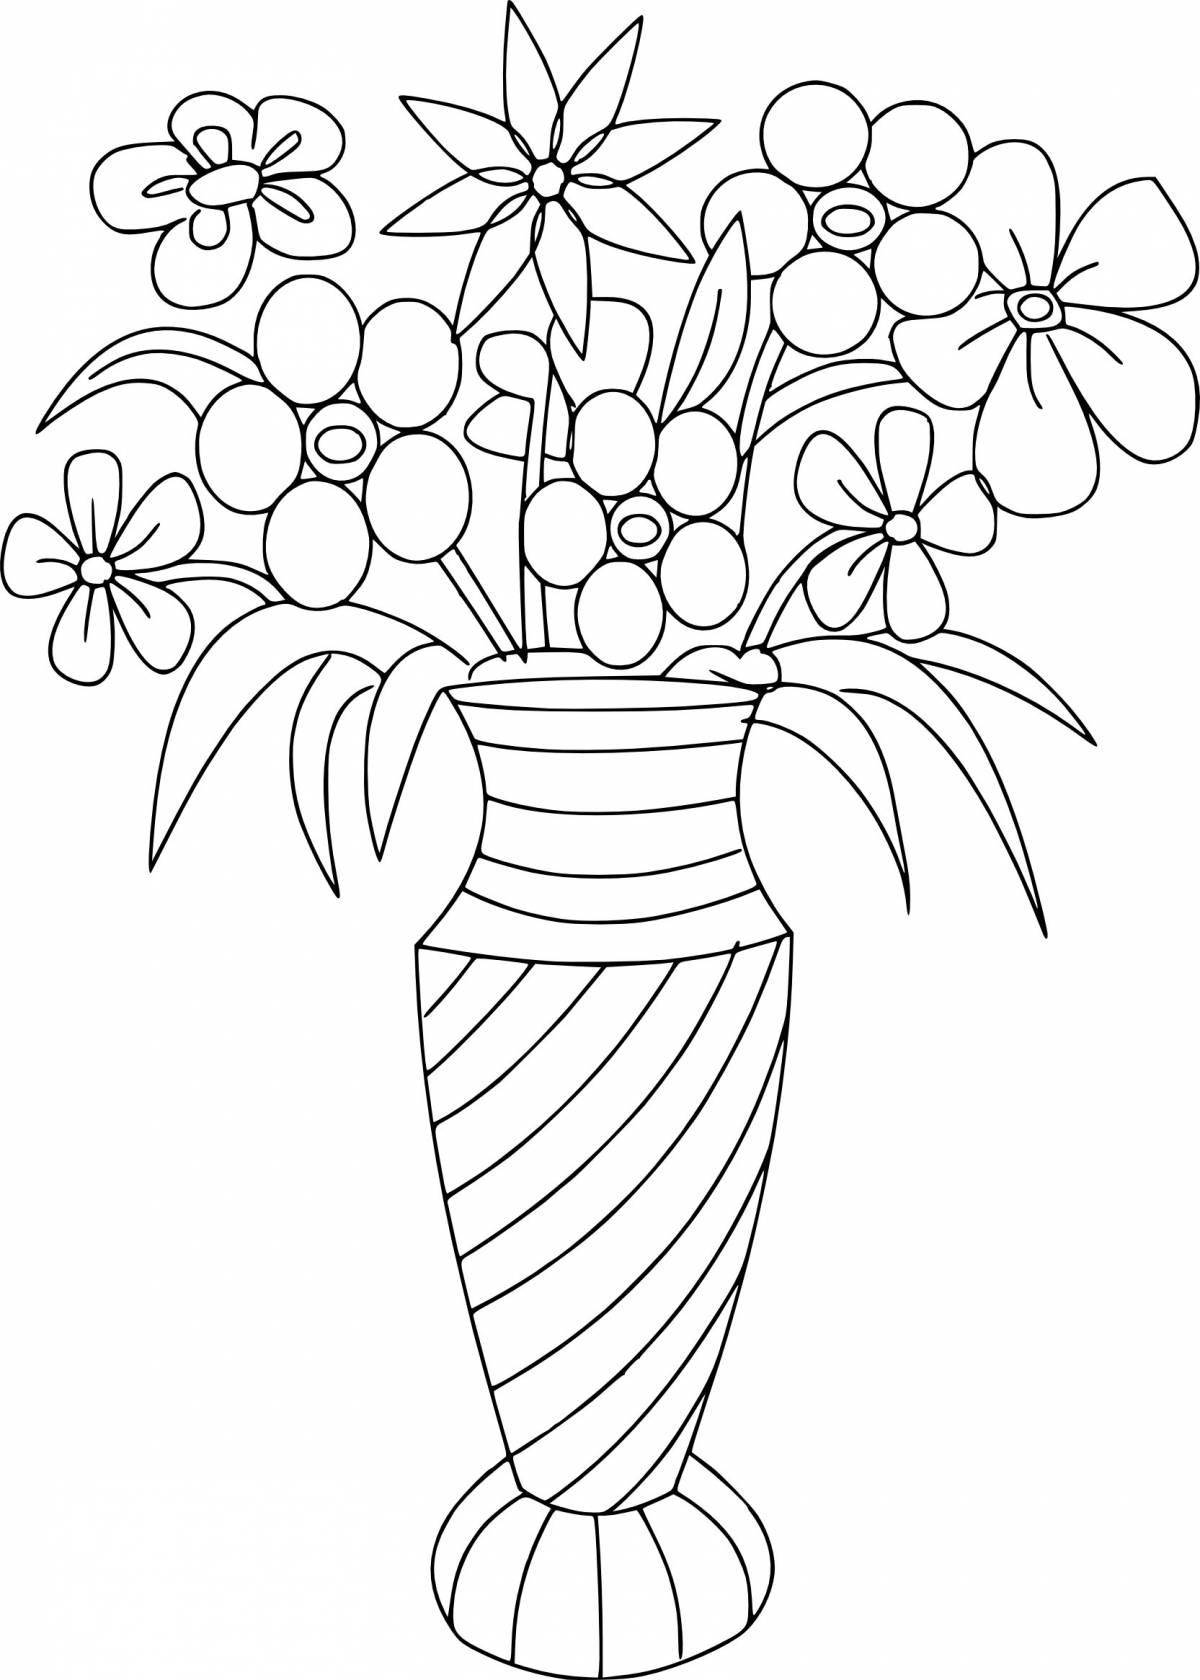 Coloring page cute bouquet in a vase